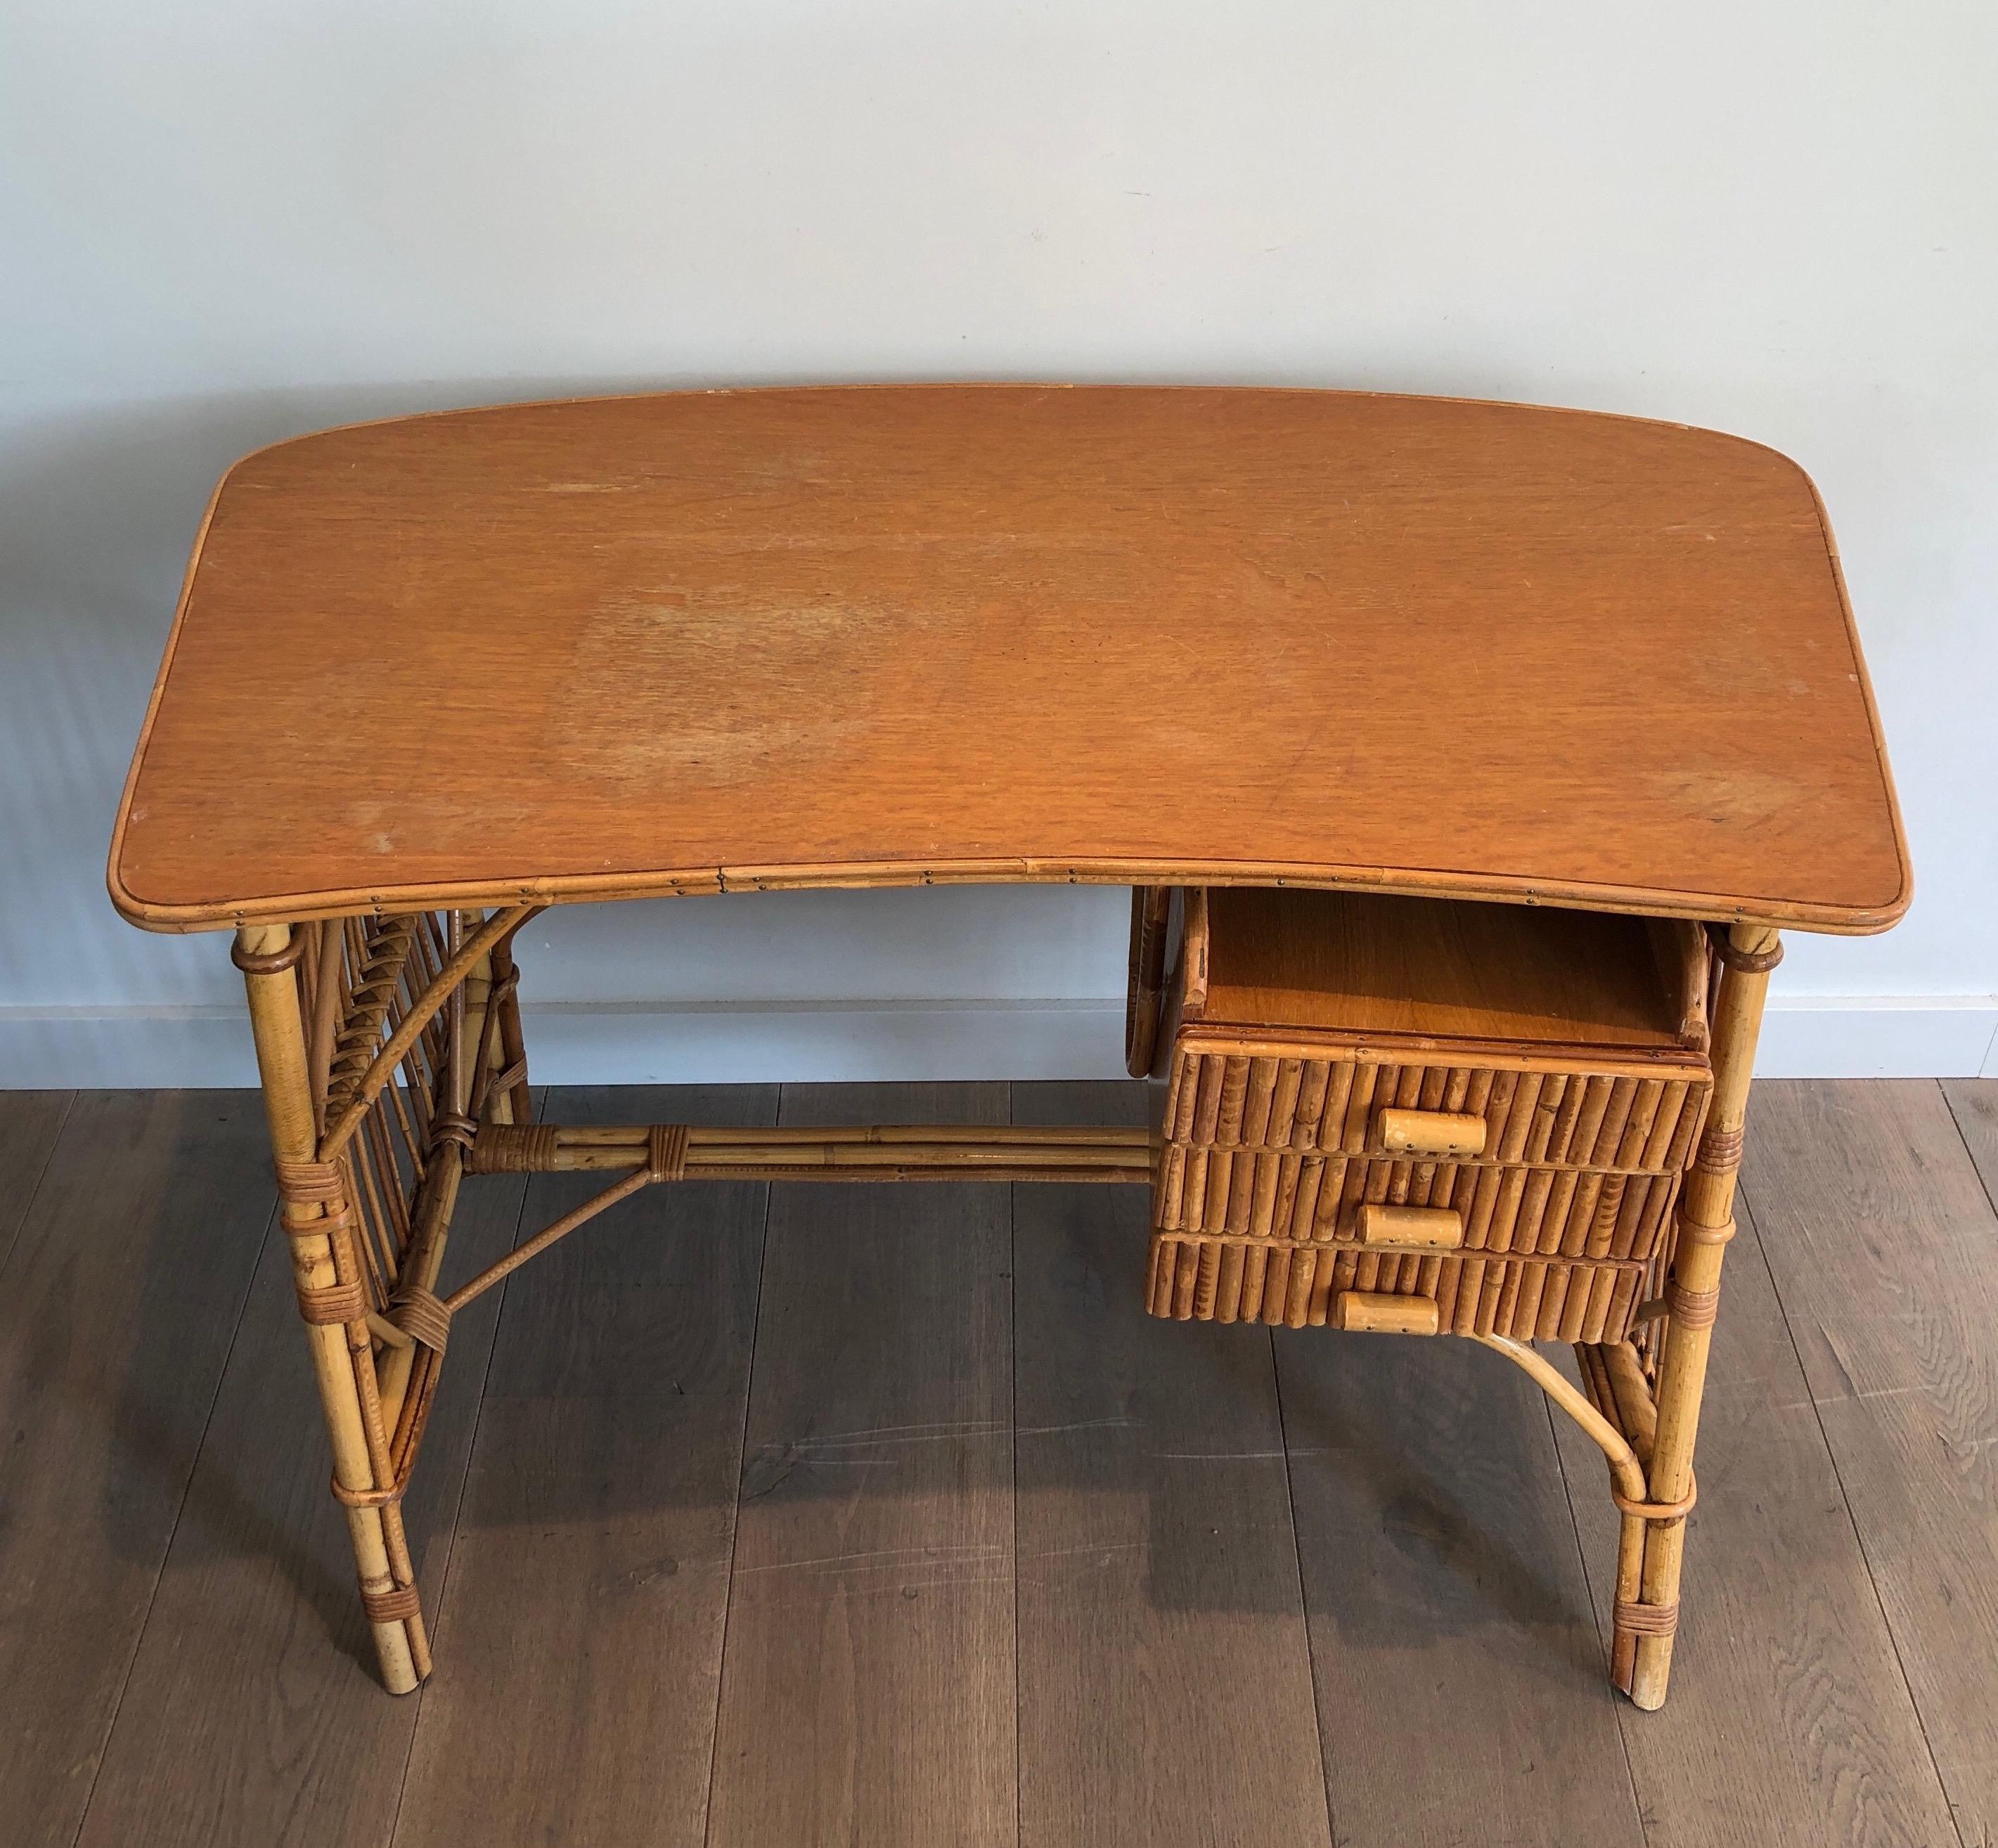 This unusual desk with drawers is made of bamboo, wood and rattan. This is a work attributed to famous French maker Audoux Minet, circa 1970.